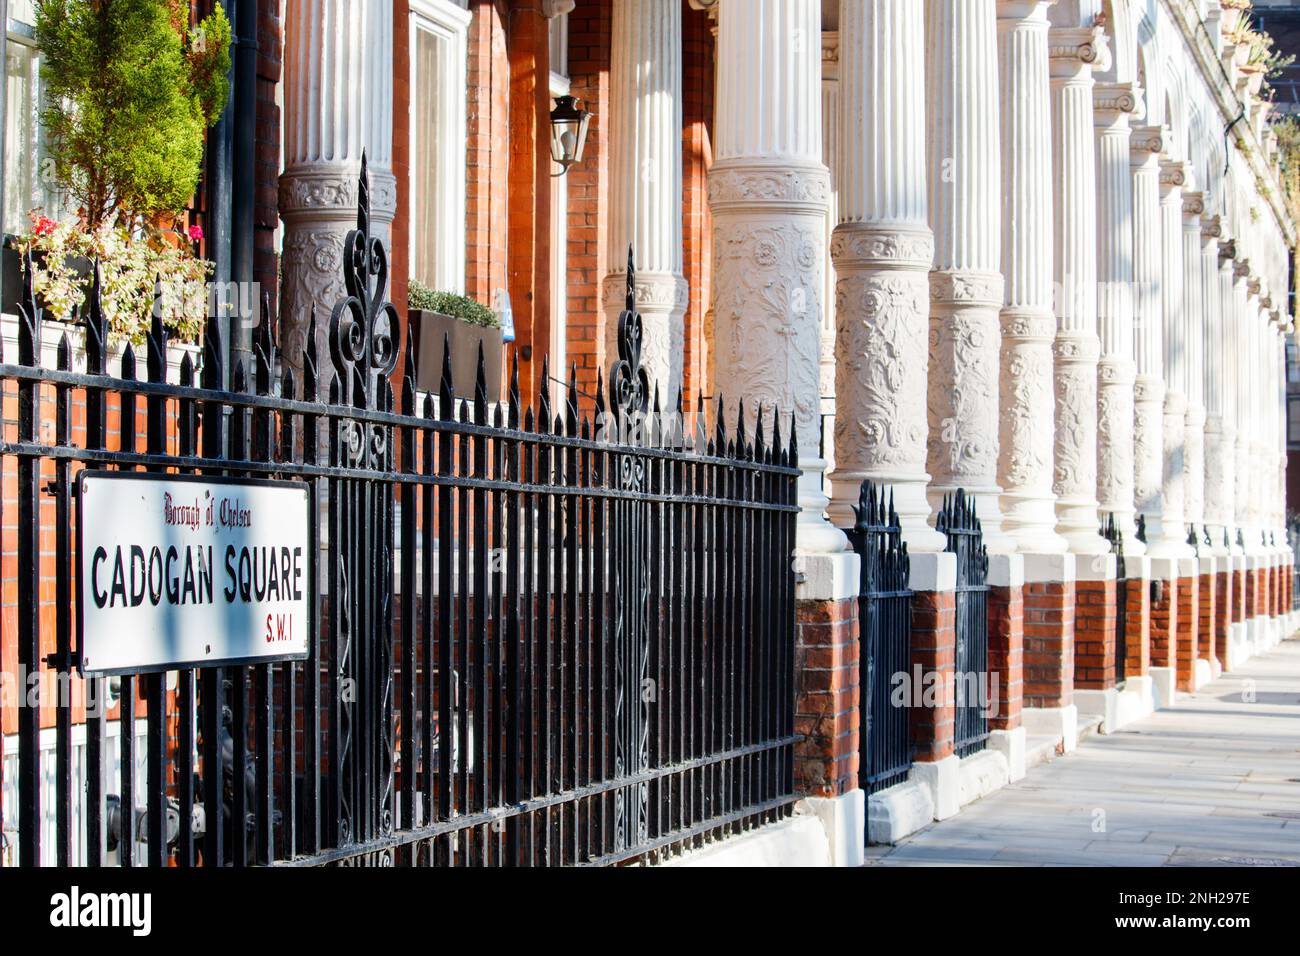 Ornate Corinthian pillars outside houses in Cadogan Square a residential square in Knightsbridge, London, that was named after Earl Cadogan. Stock Photo